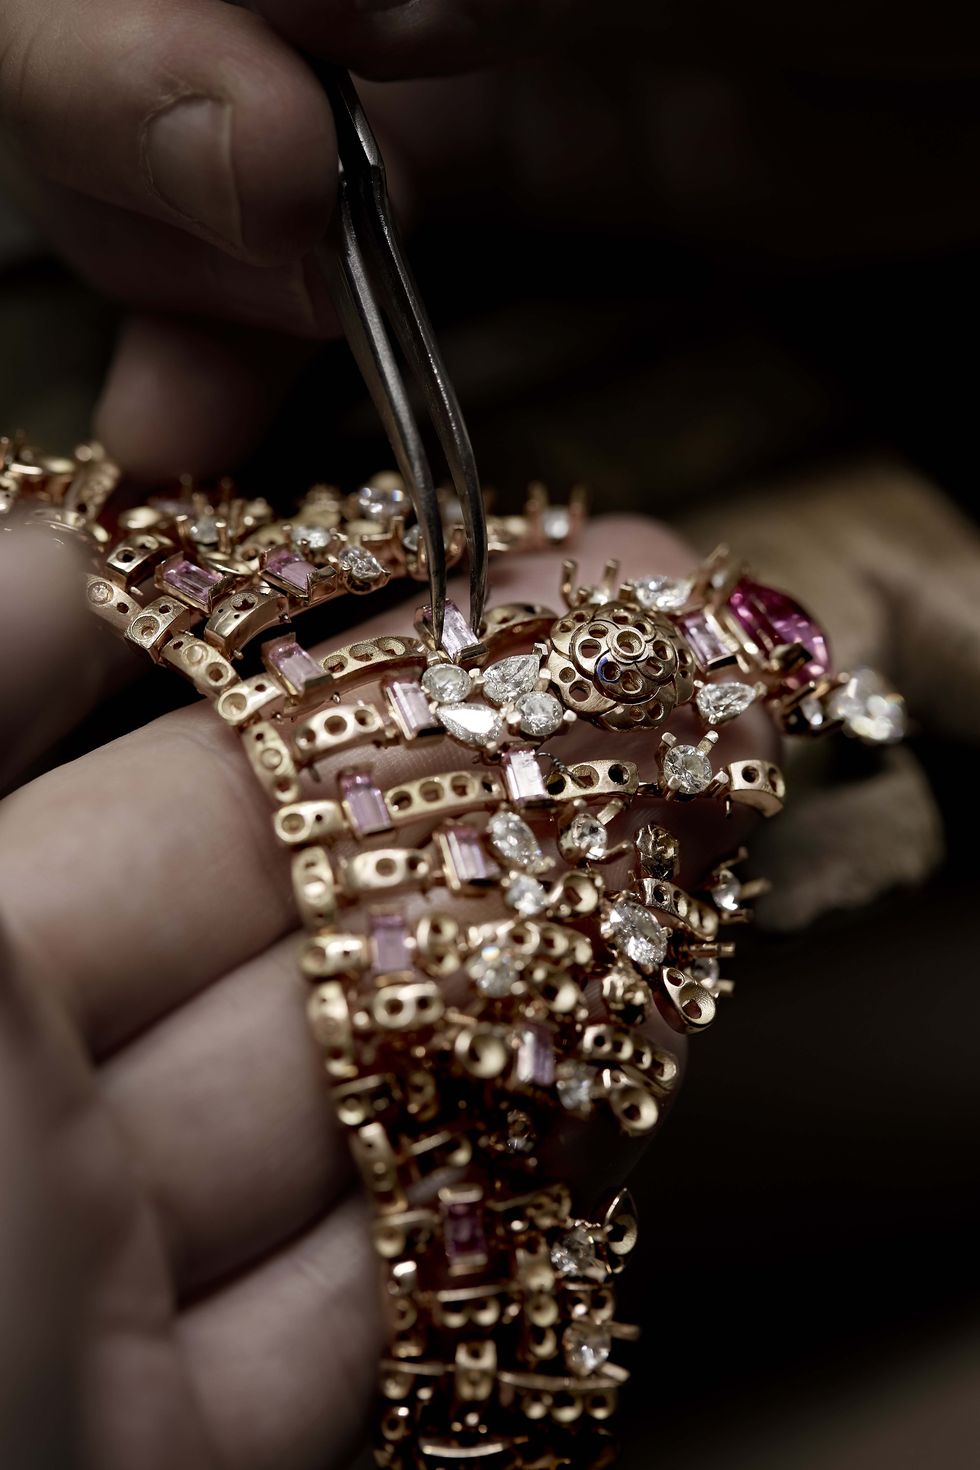 Chanel's New High Jewelry Collection, Tweed De Chanel, is an Ode